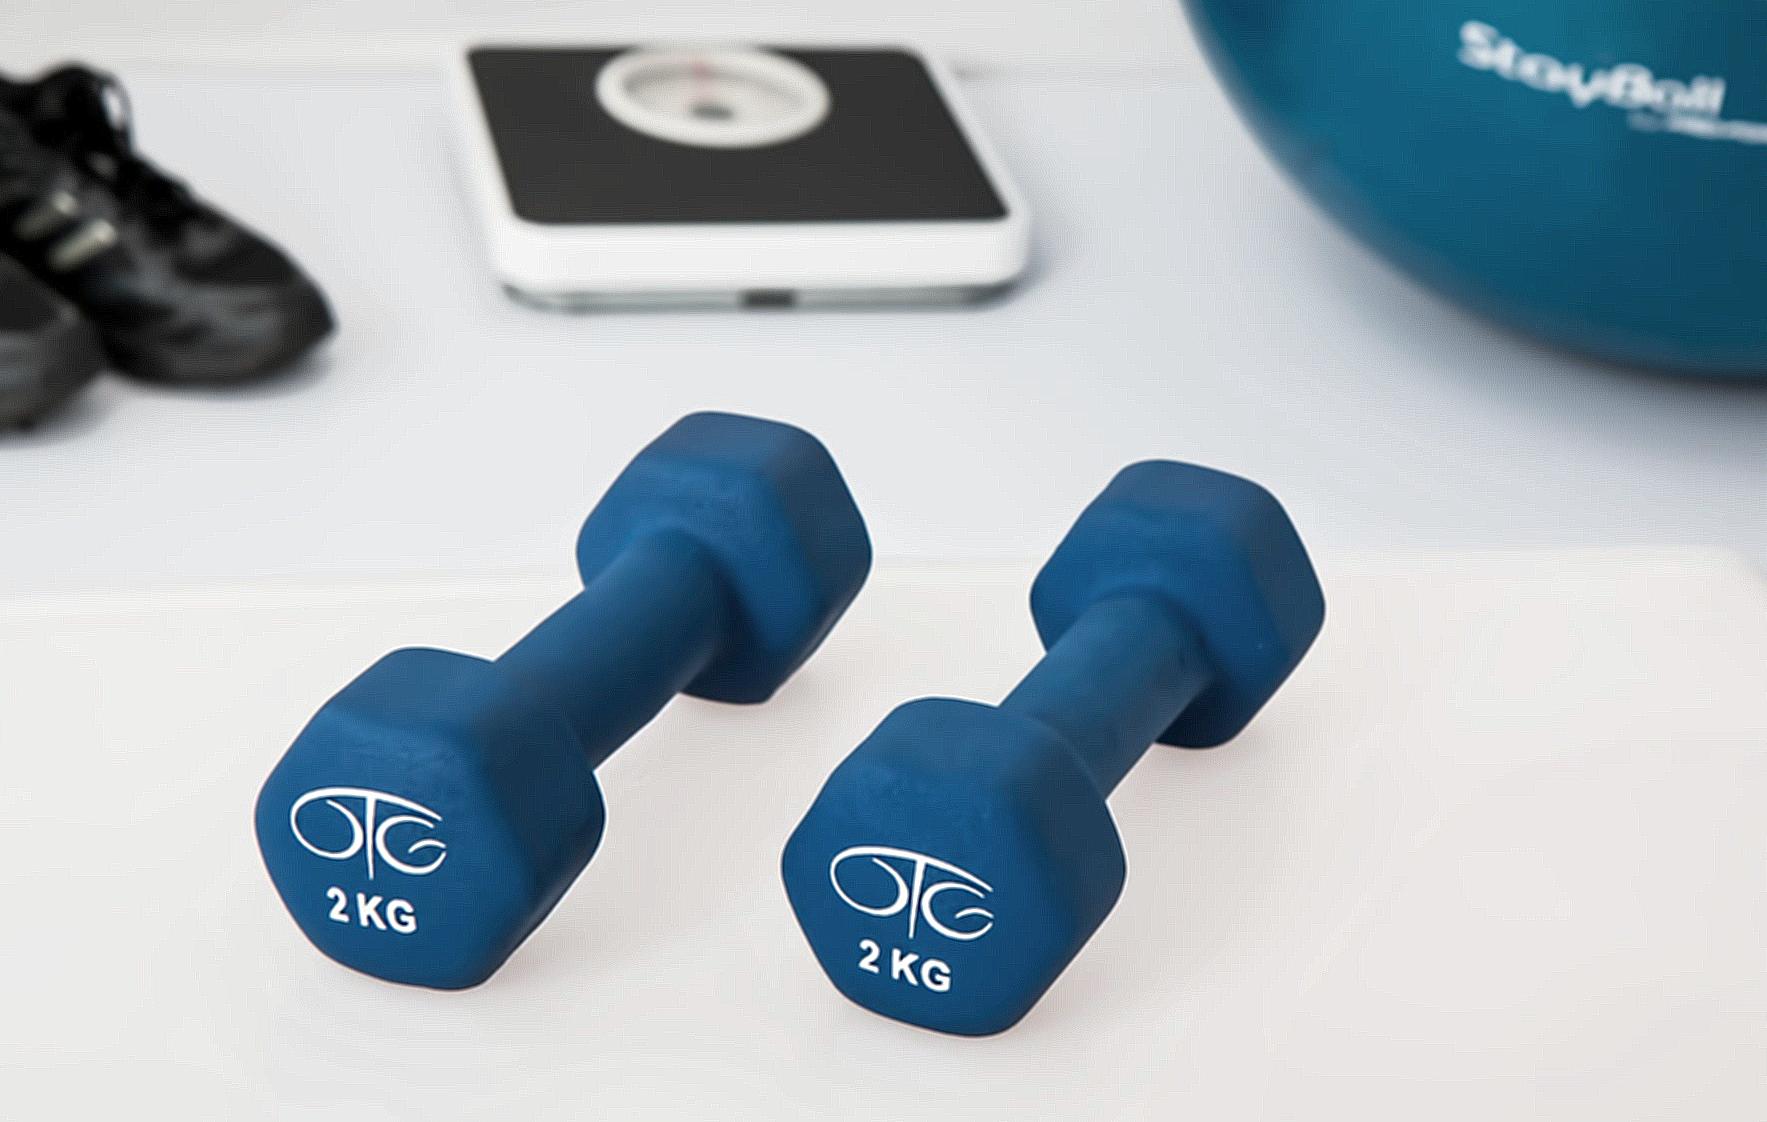 Two 2 Kg. Blue Hex Dumbbells on White Surface